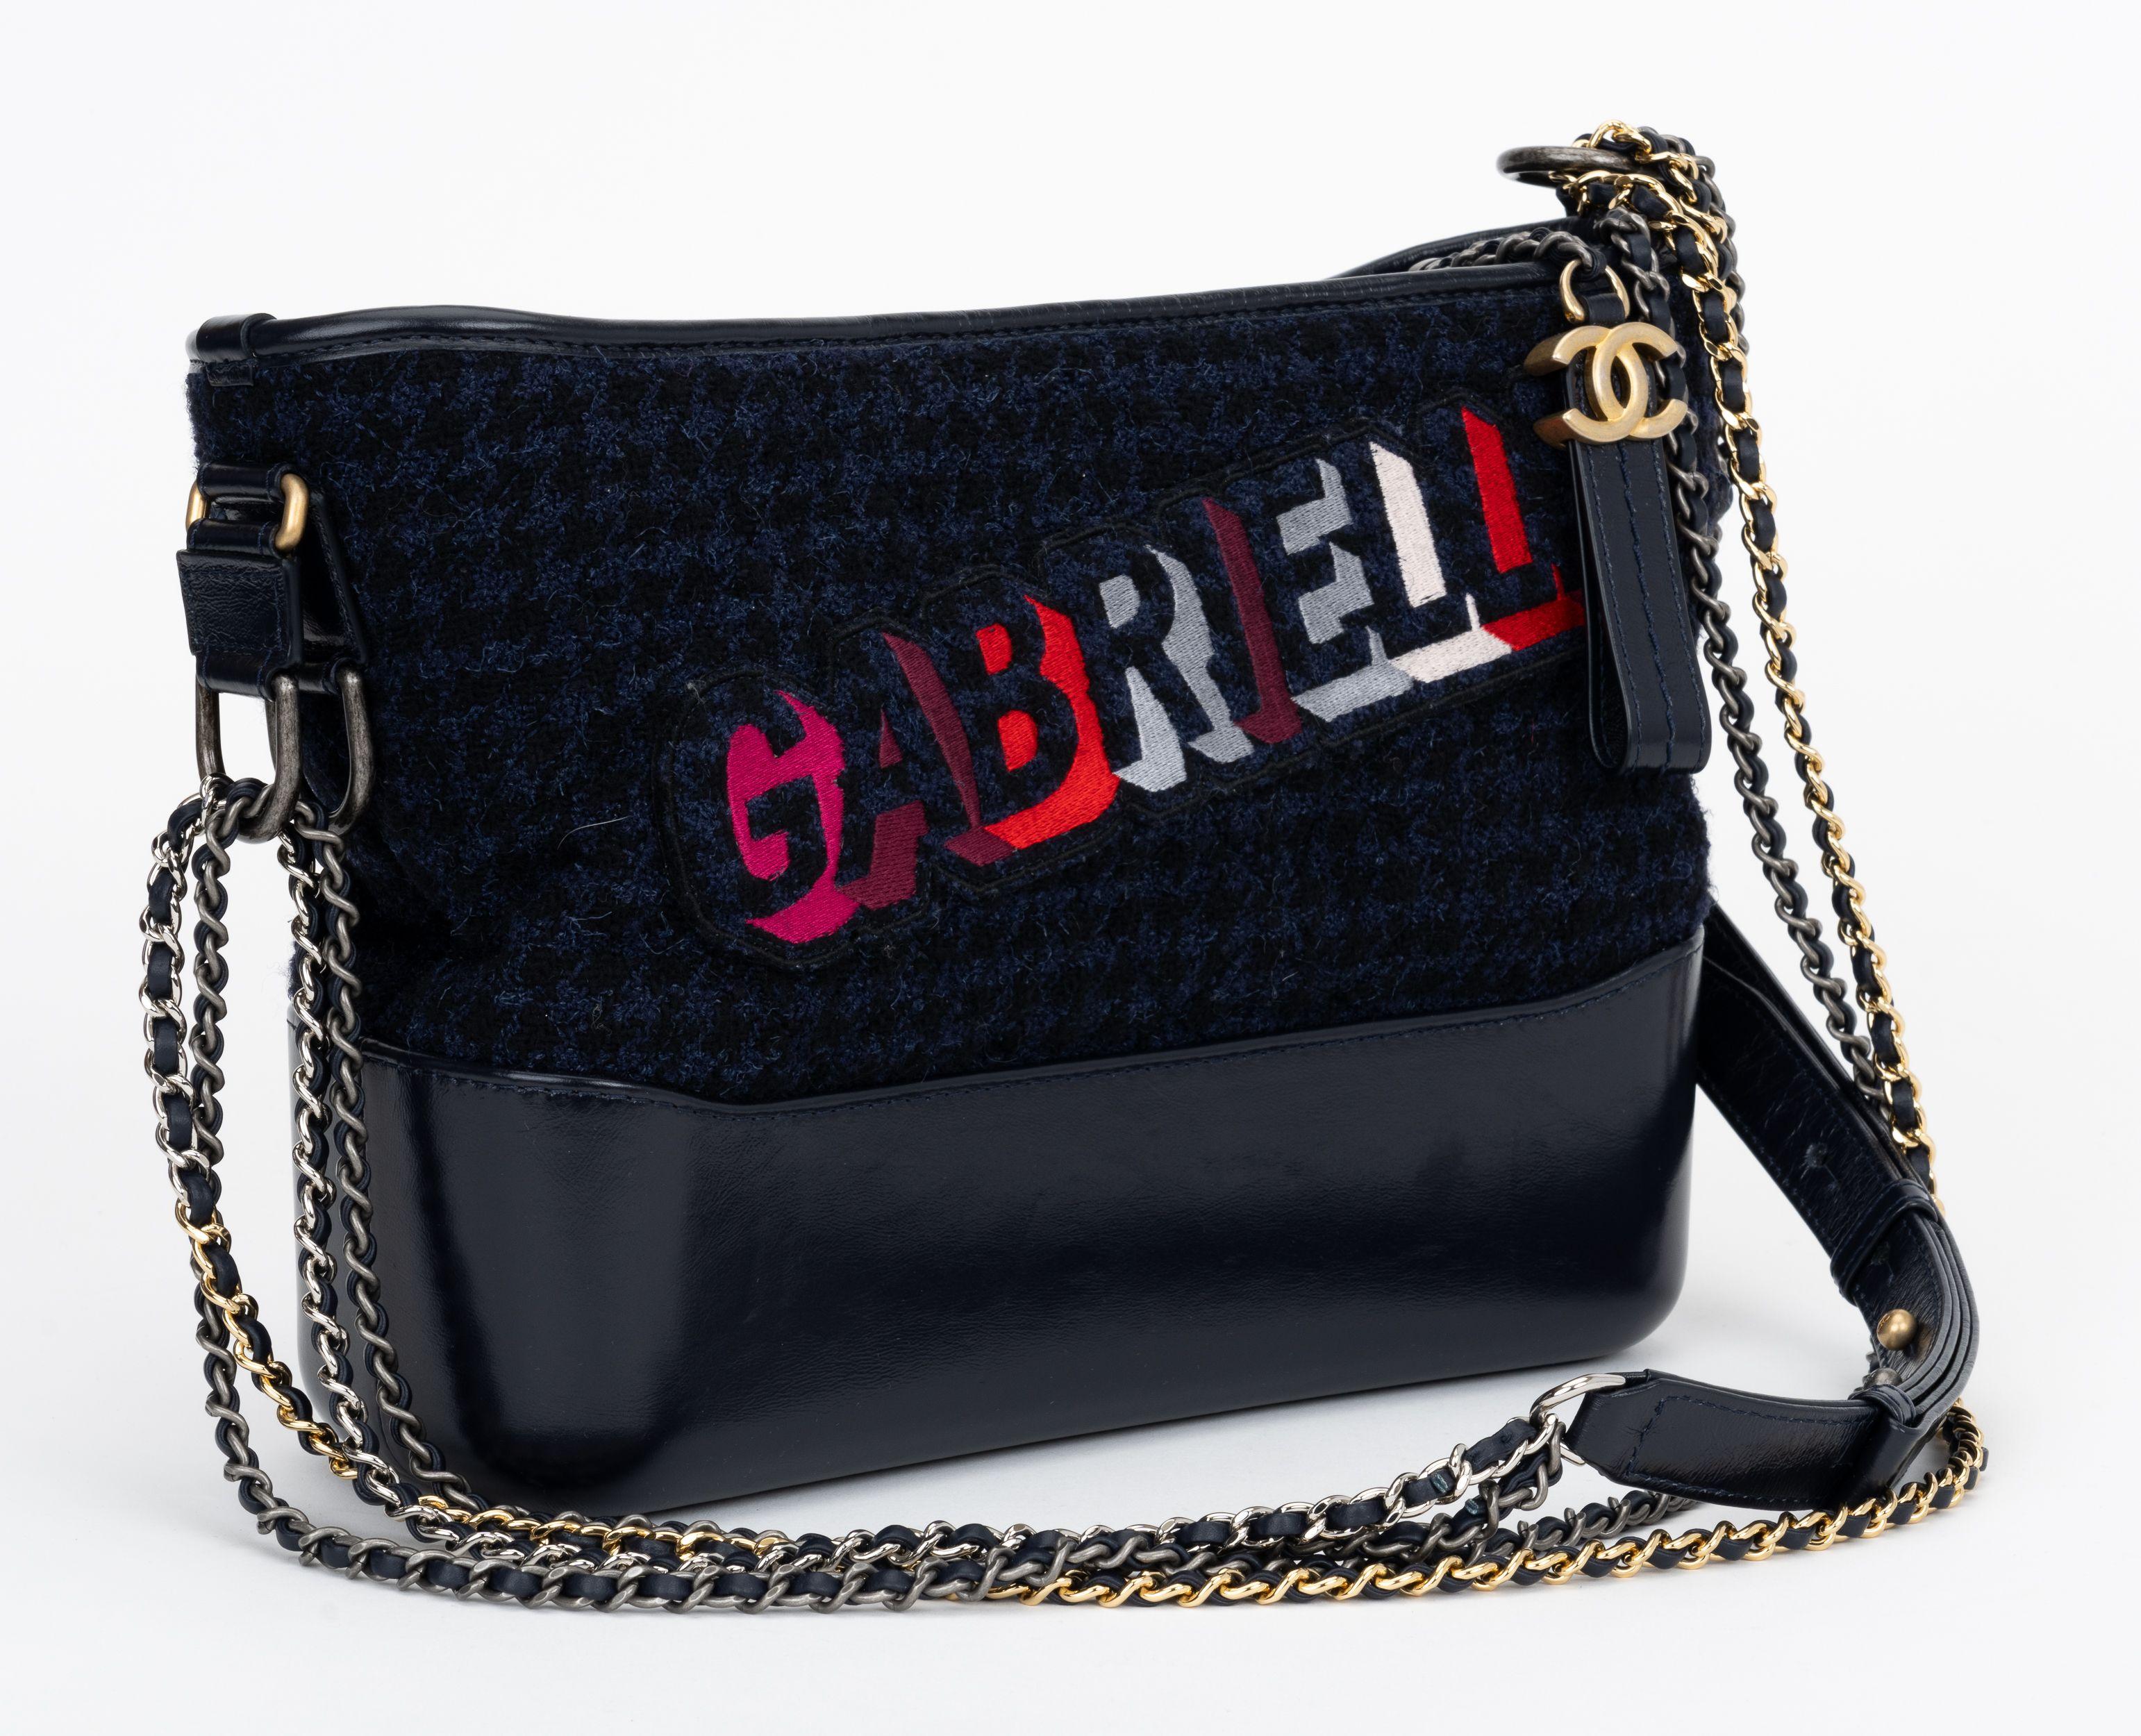 Chanel  navy leather and tweed Gabrielle bag. Can be worn shoulder or double body strap. Drop 16